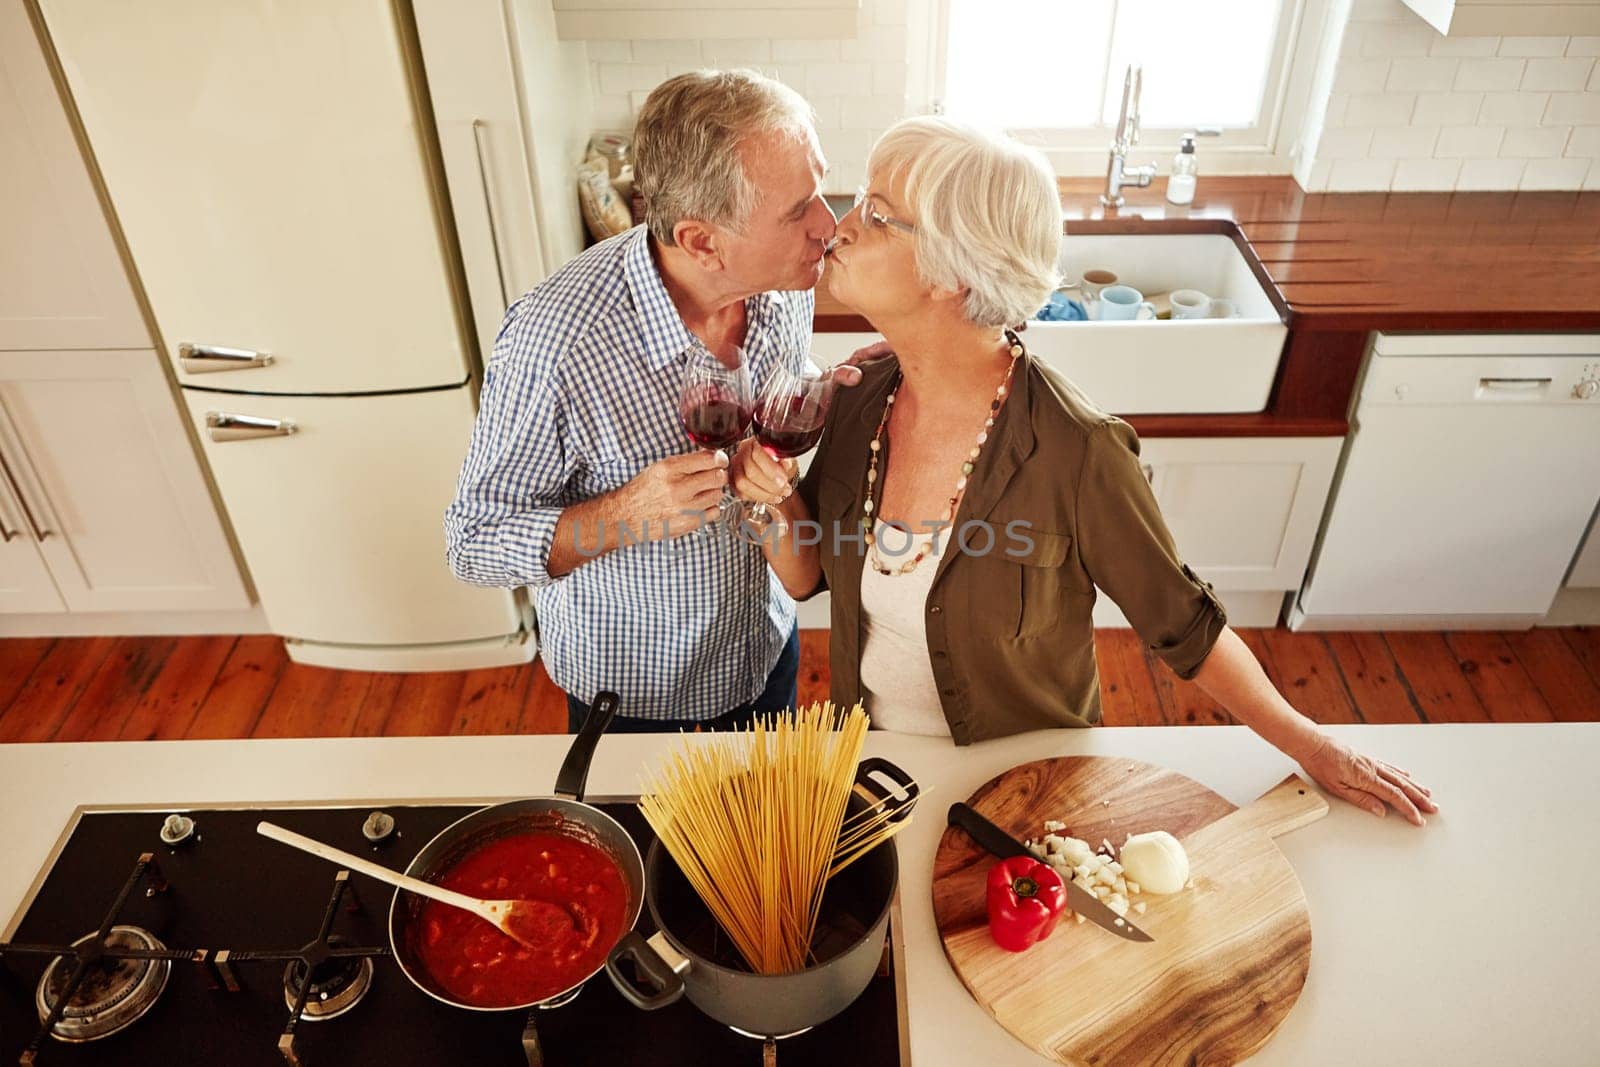 Kiss, wine toast or old couple cooking food for a healthy vegan diet together with love in retirement at home. Top view of senior woman drinking or kissing in kitchen with mature husband at dinner.